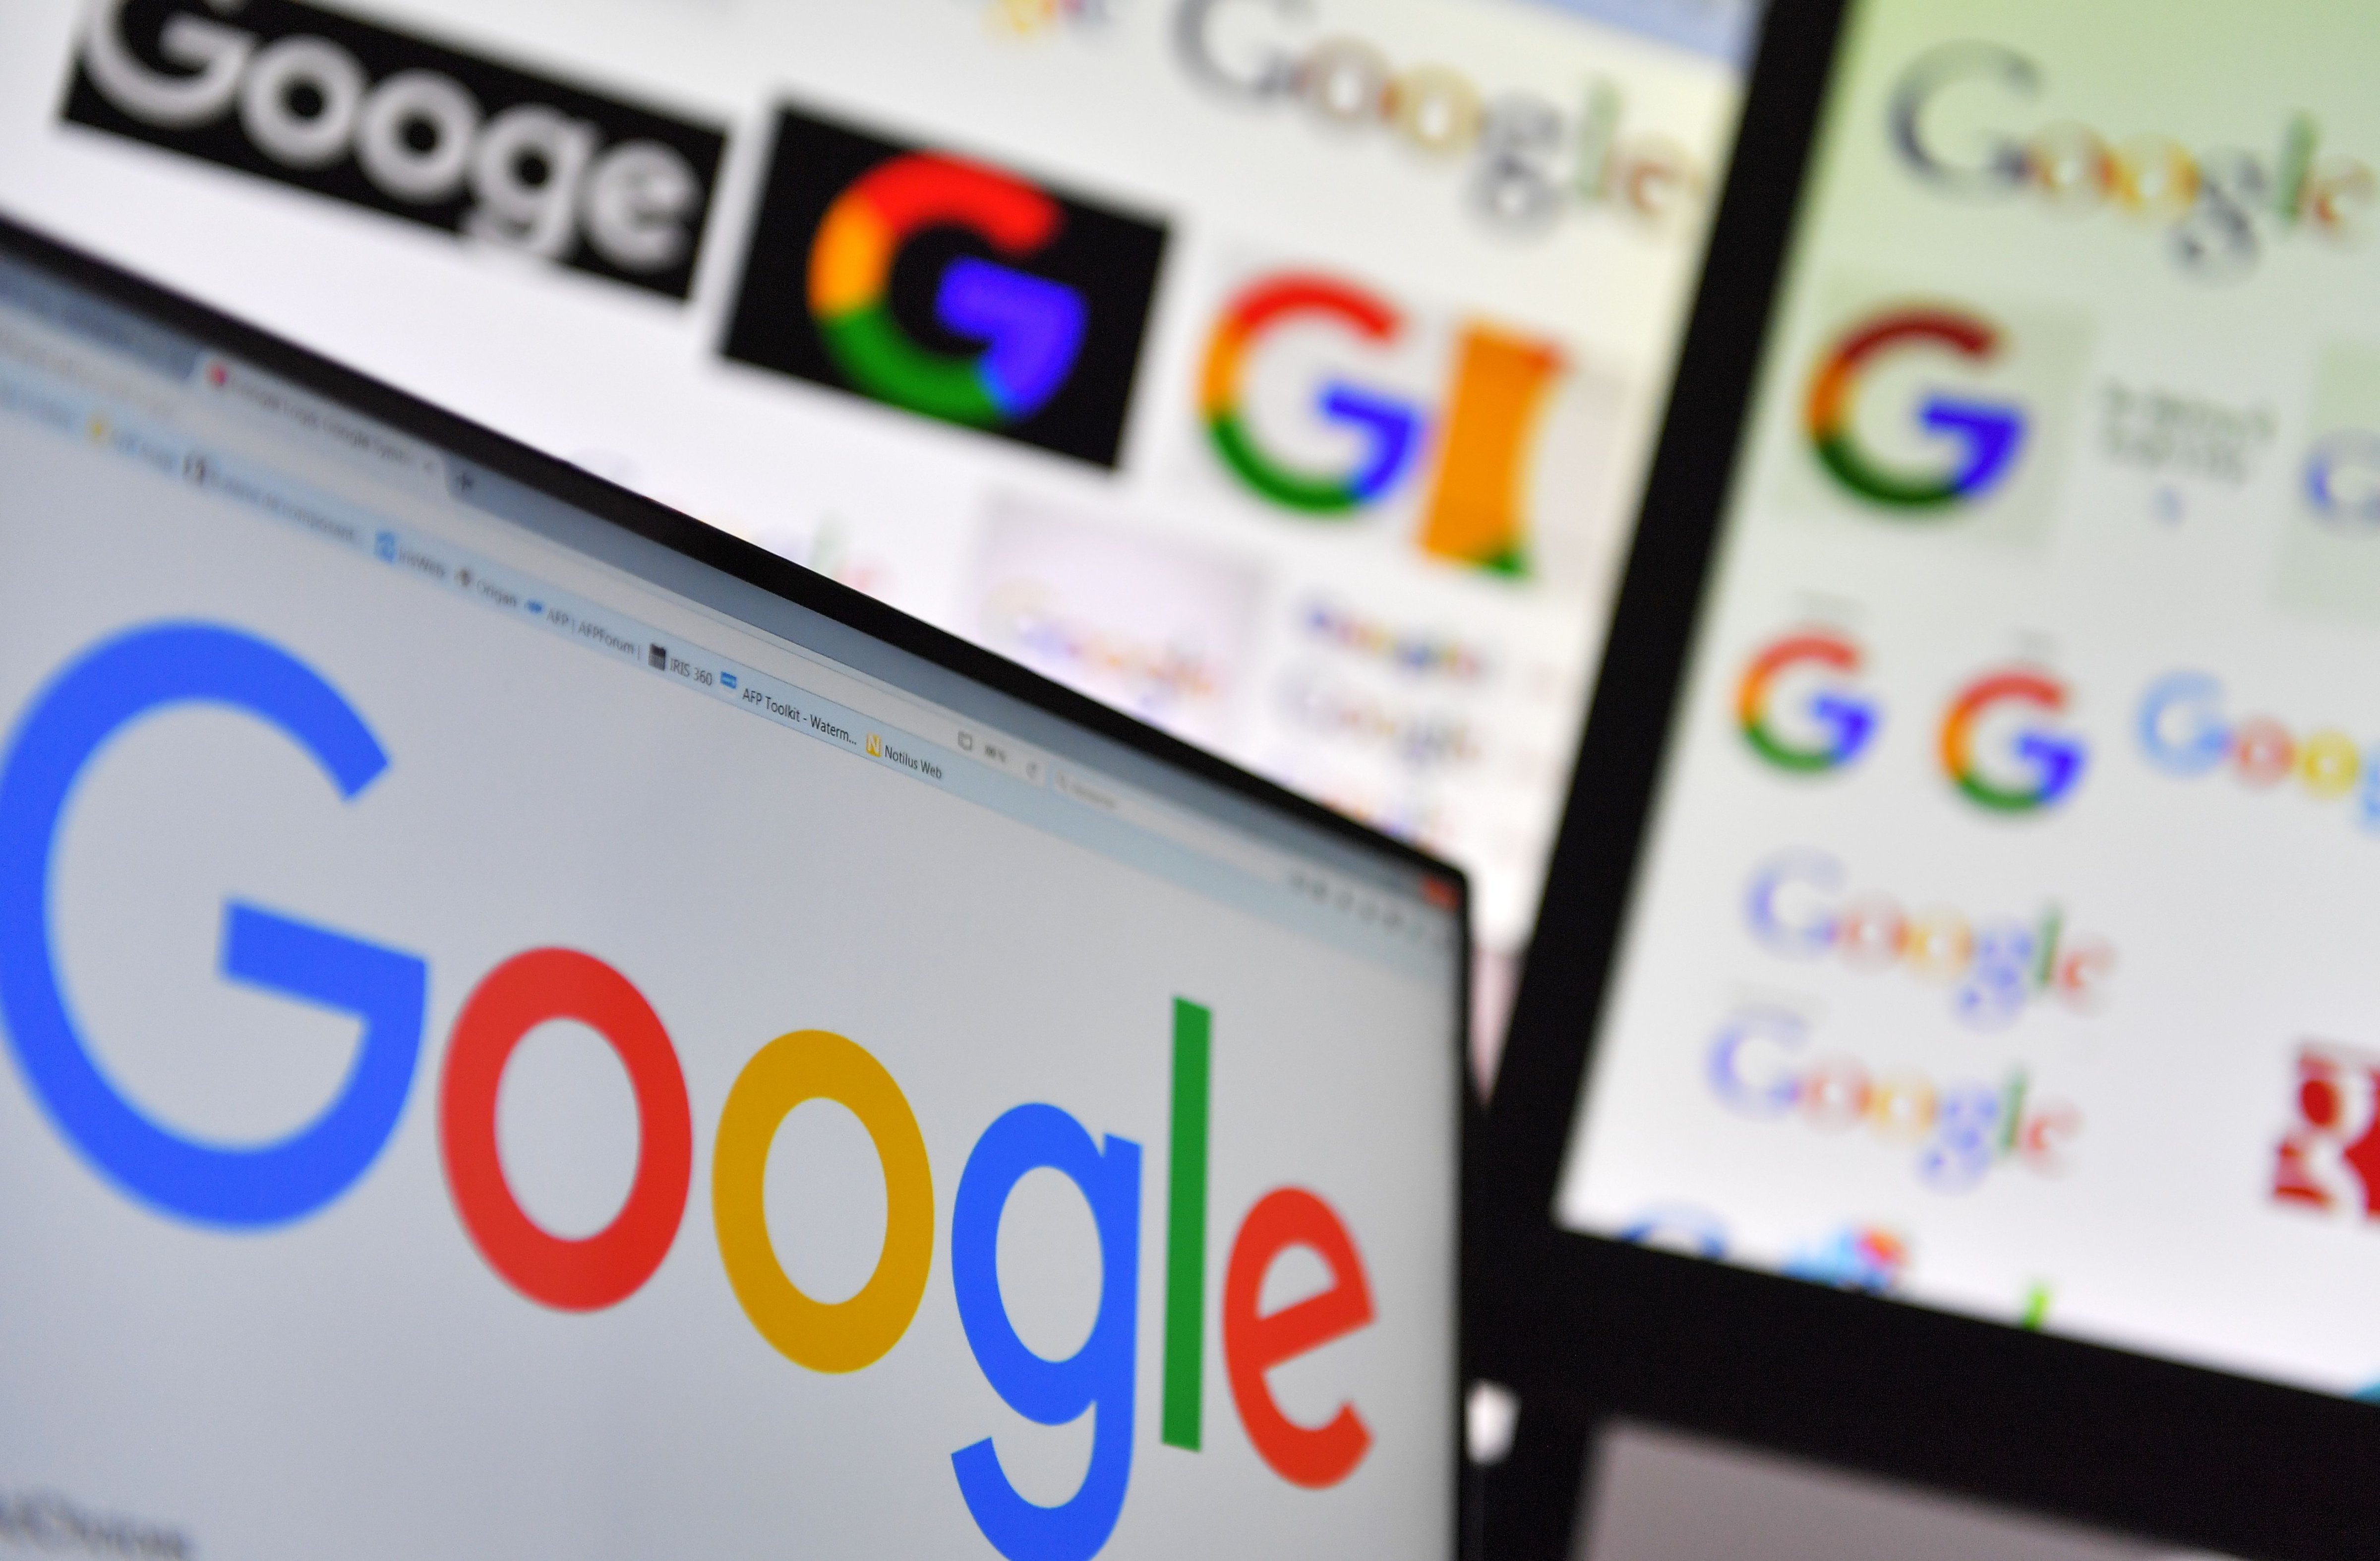 A picture taken on Nov. 20, 2017 shows logos of US multinational technology company Google displayed on computer screens. (Loic Venance&mdash;AFP/Getty Images)